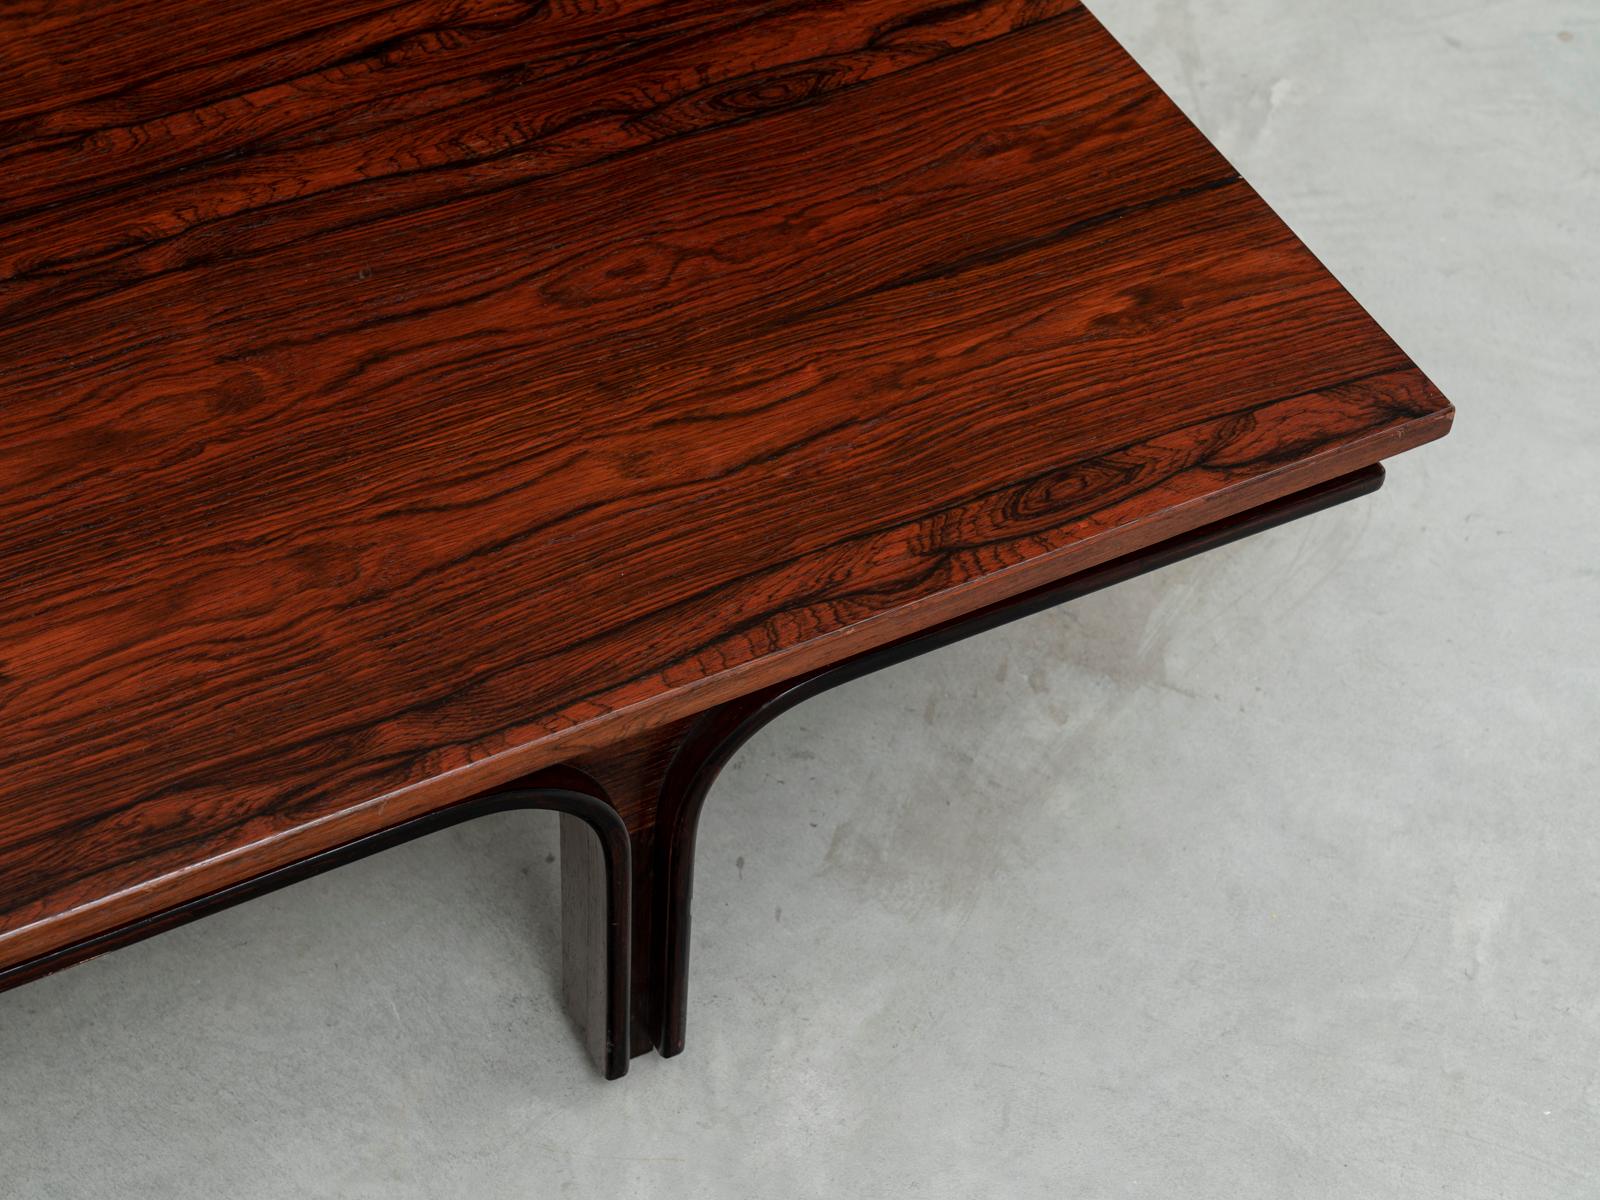 Gianfranco Frattini Midcentury Mod 514 Large Rosewood Low Table for Bernini 1956 In Good Condition For Sale In Milan, Italy